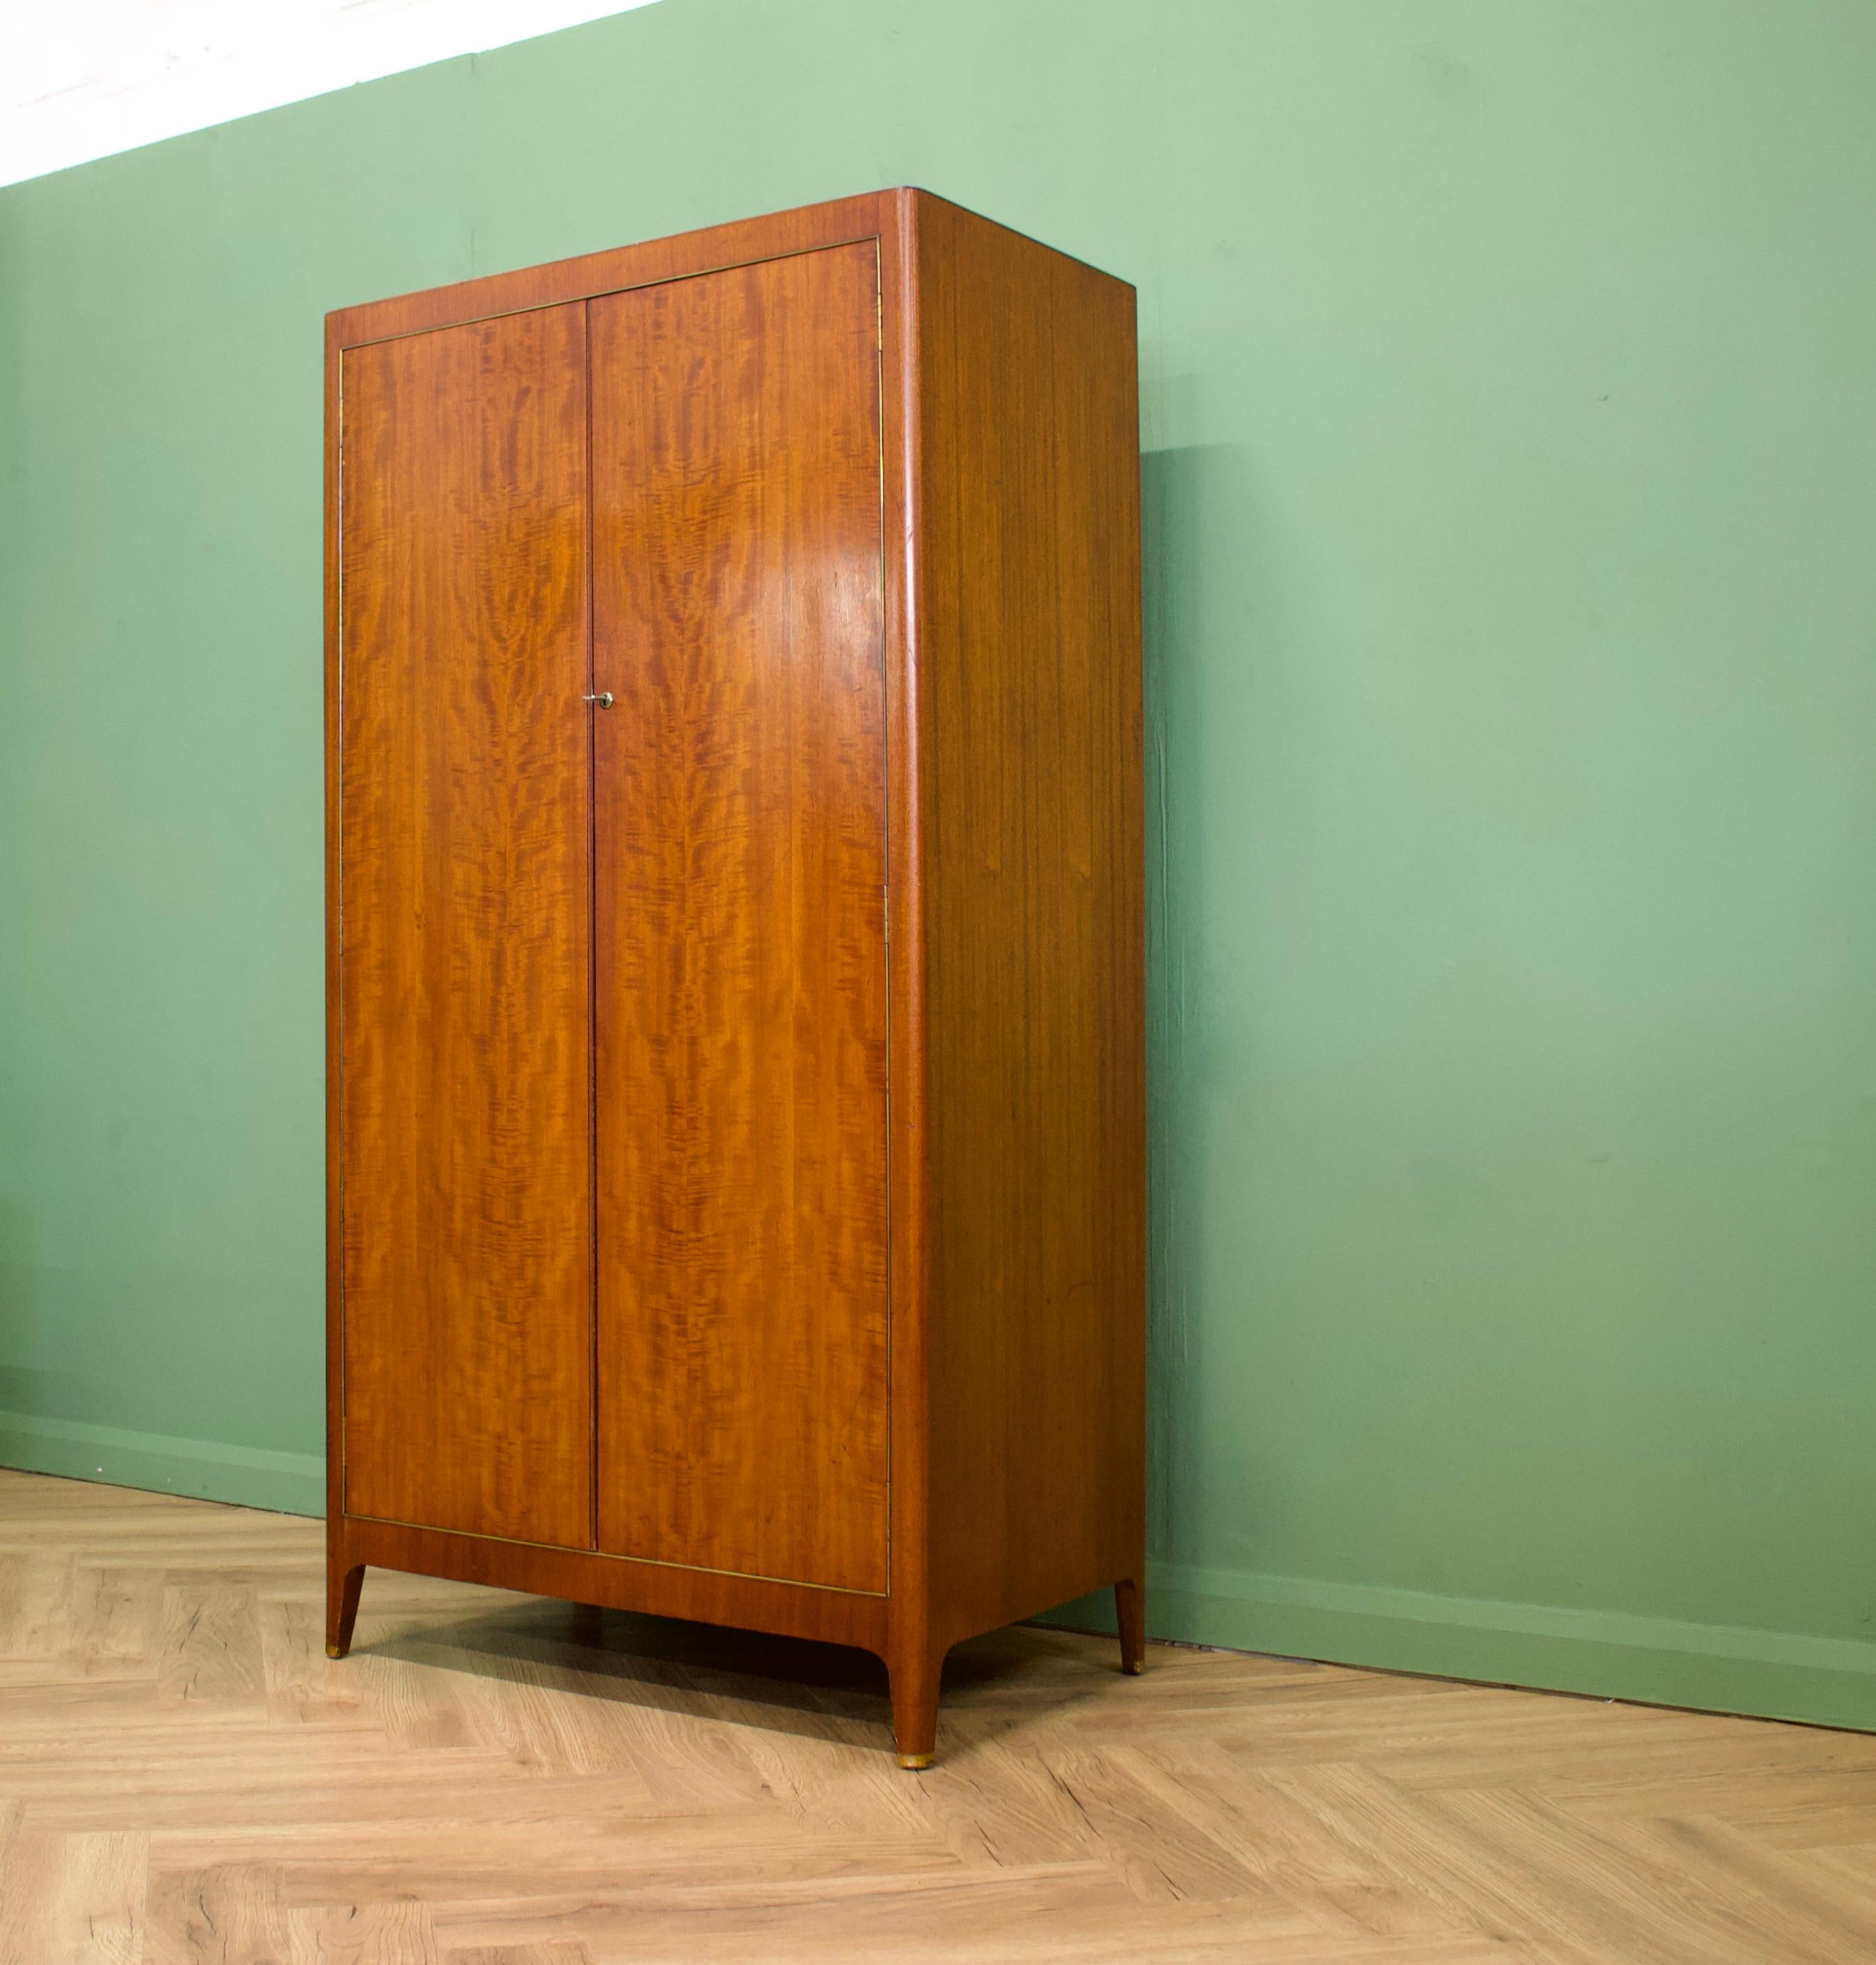 - Mid-Century Modern wardrobe.
- Manufactured by Greaves and Thomas in the UK .

- Made from mahogany and mahogany veneers.
- Featuring a hanging rail and shoe rail